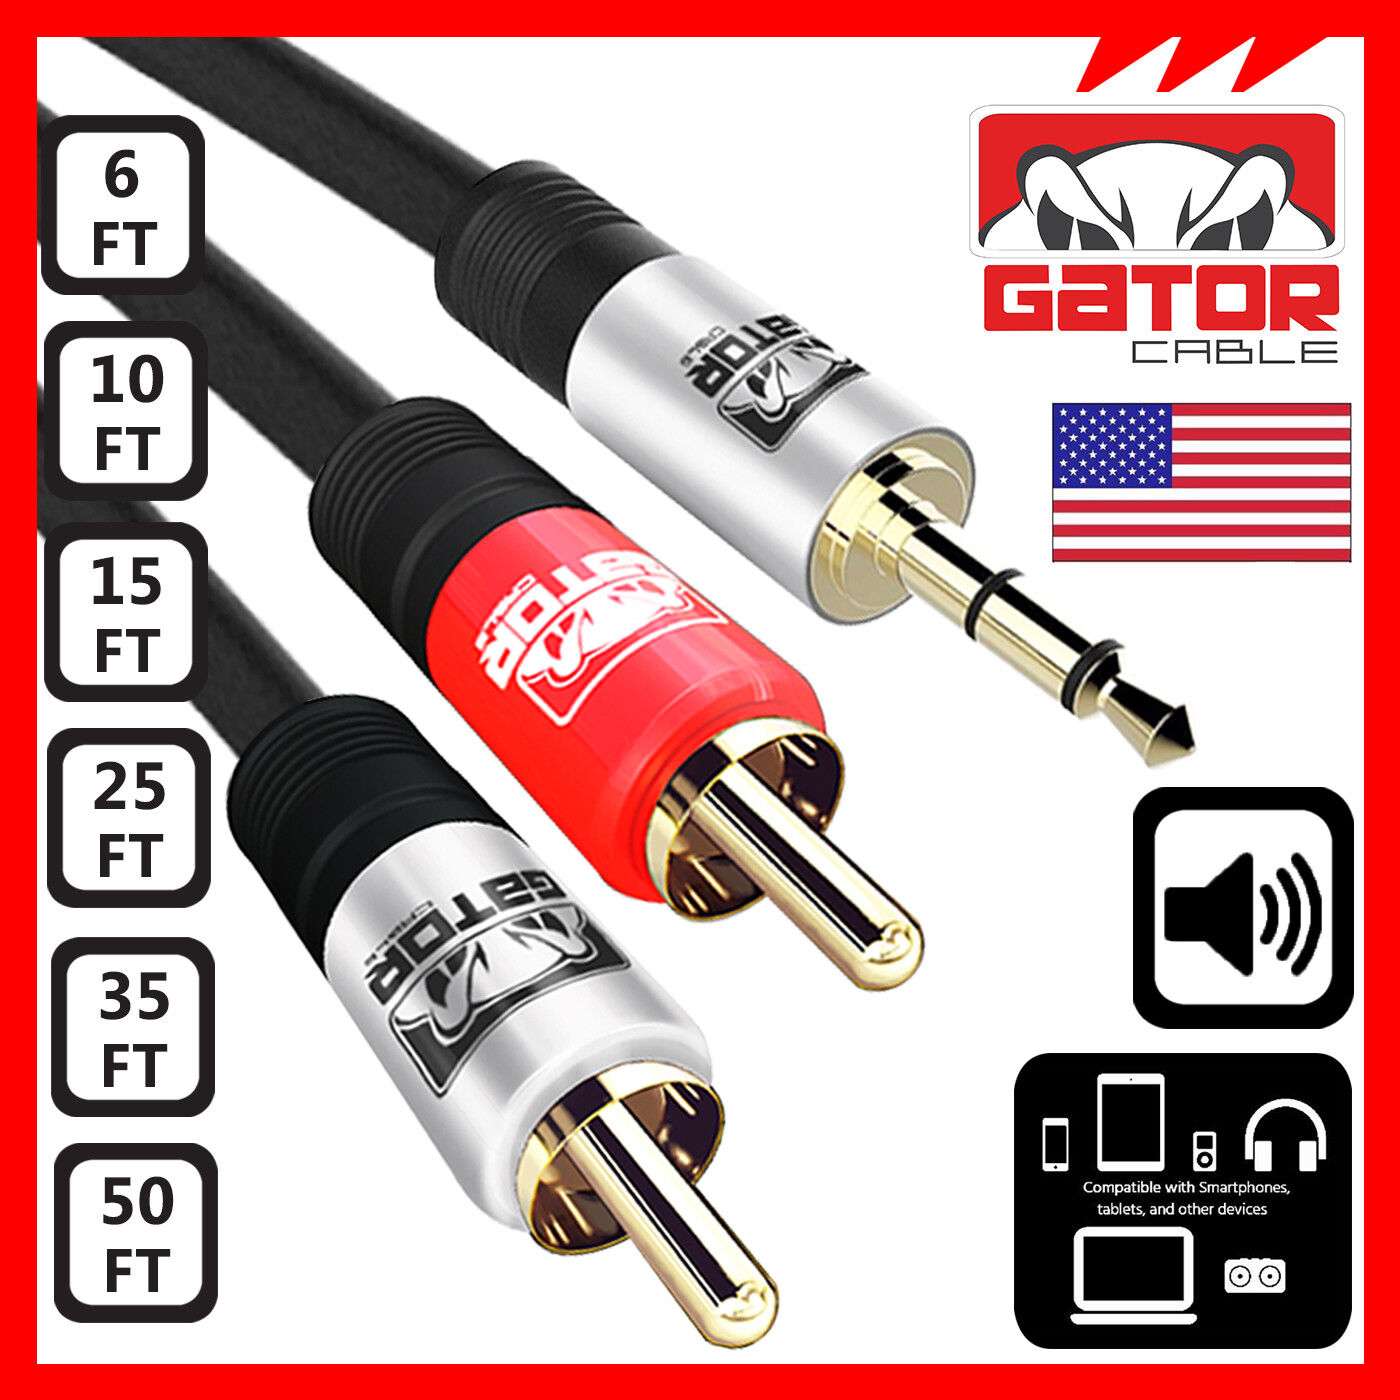 AUX Auxiliary 3.5mm Audio Male to 2 RCA Y Male Stereo Cable Cord Wire Plug Gator Cable AUX-3.5MM-To-2RCA-Cable - фотография #7